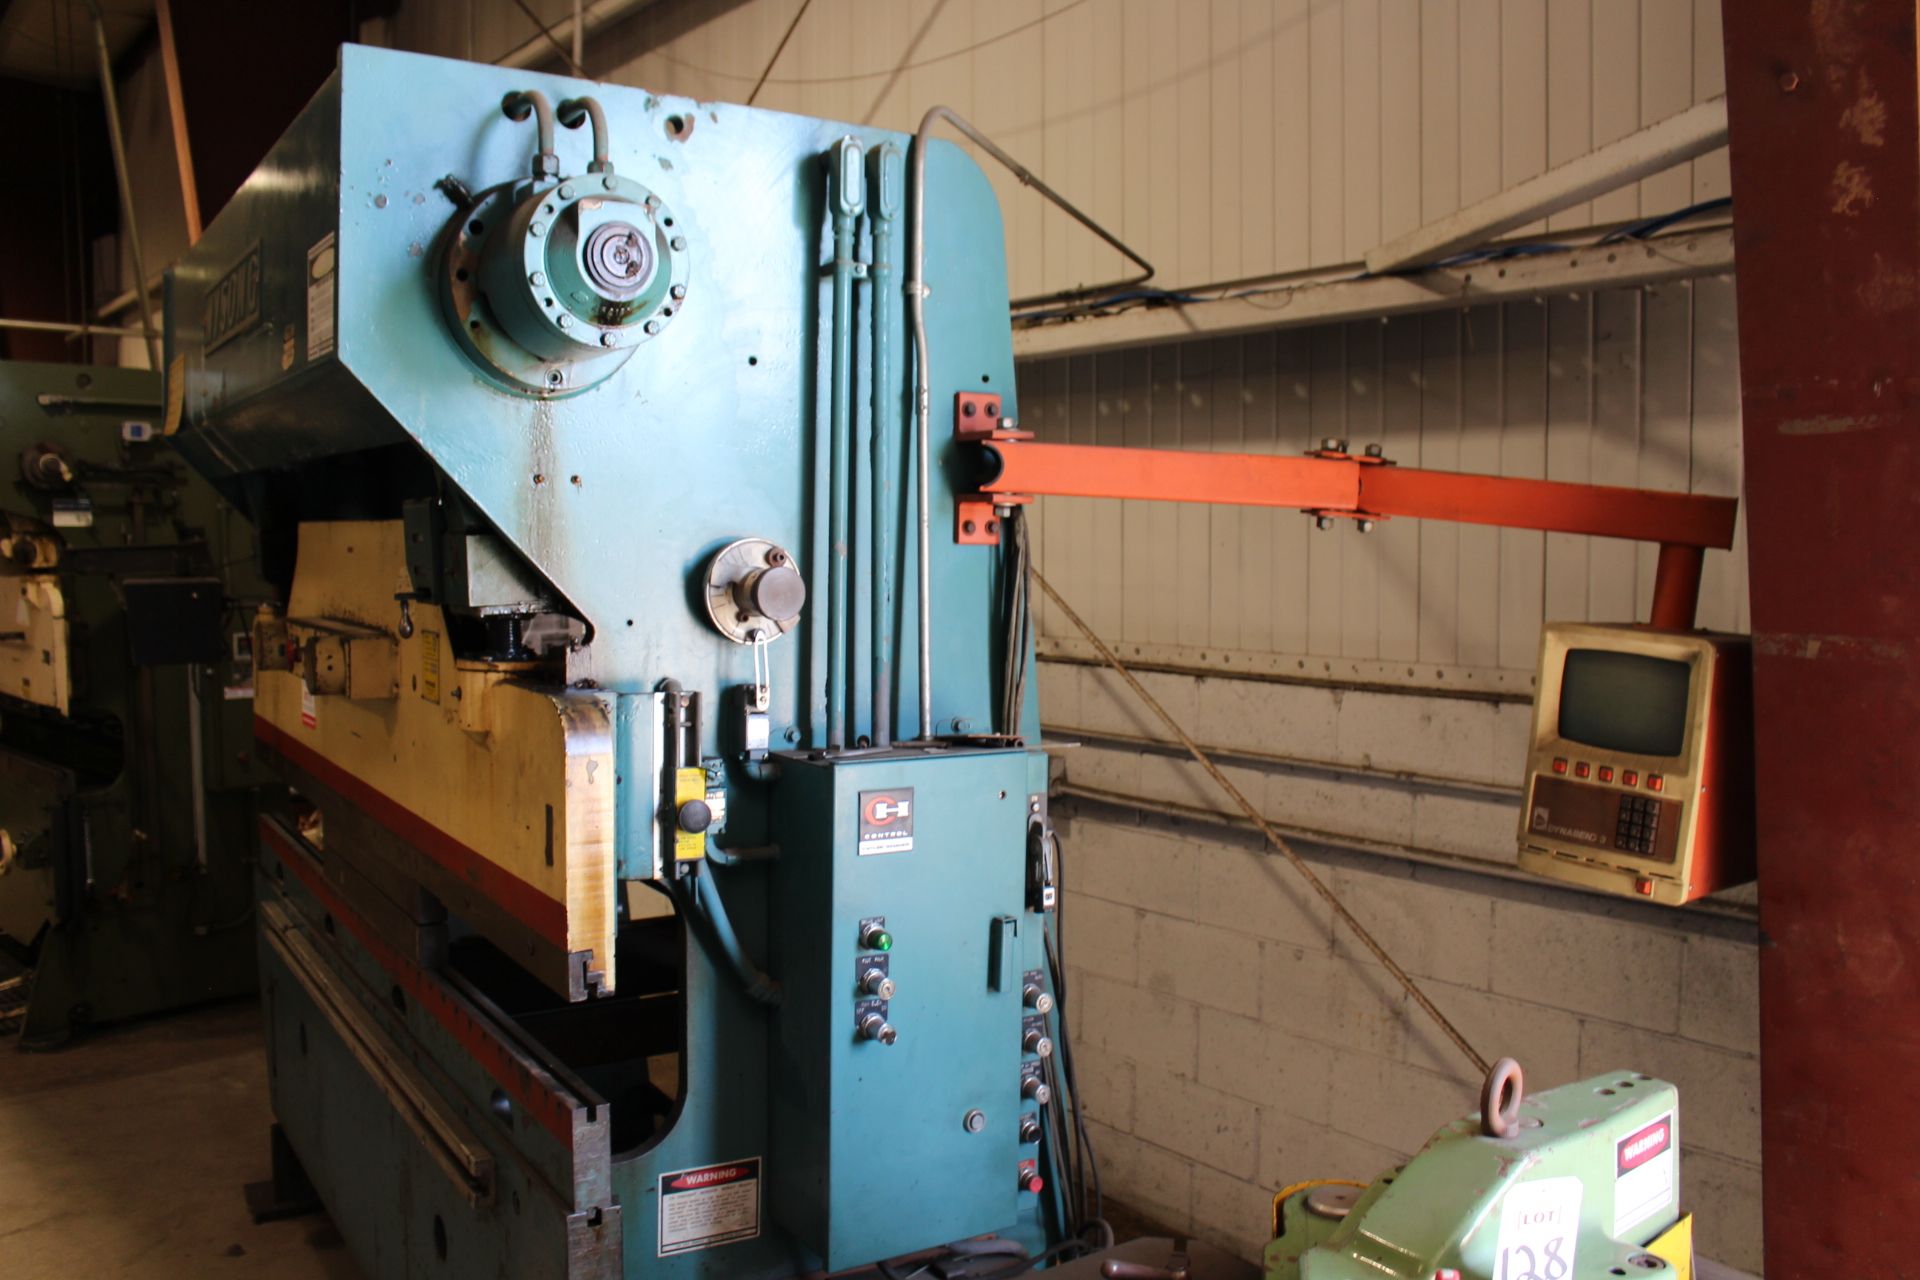 WYSONG H-55-6 HYDRA-MECHANICAL PRESS BRAKE, S/N HPB21-113, 55 TON X 6', DYNABEND 3 CONTROL - Image 2 of 4